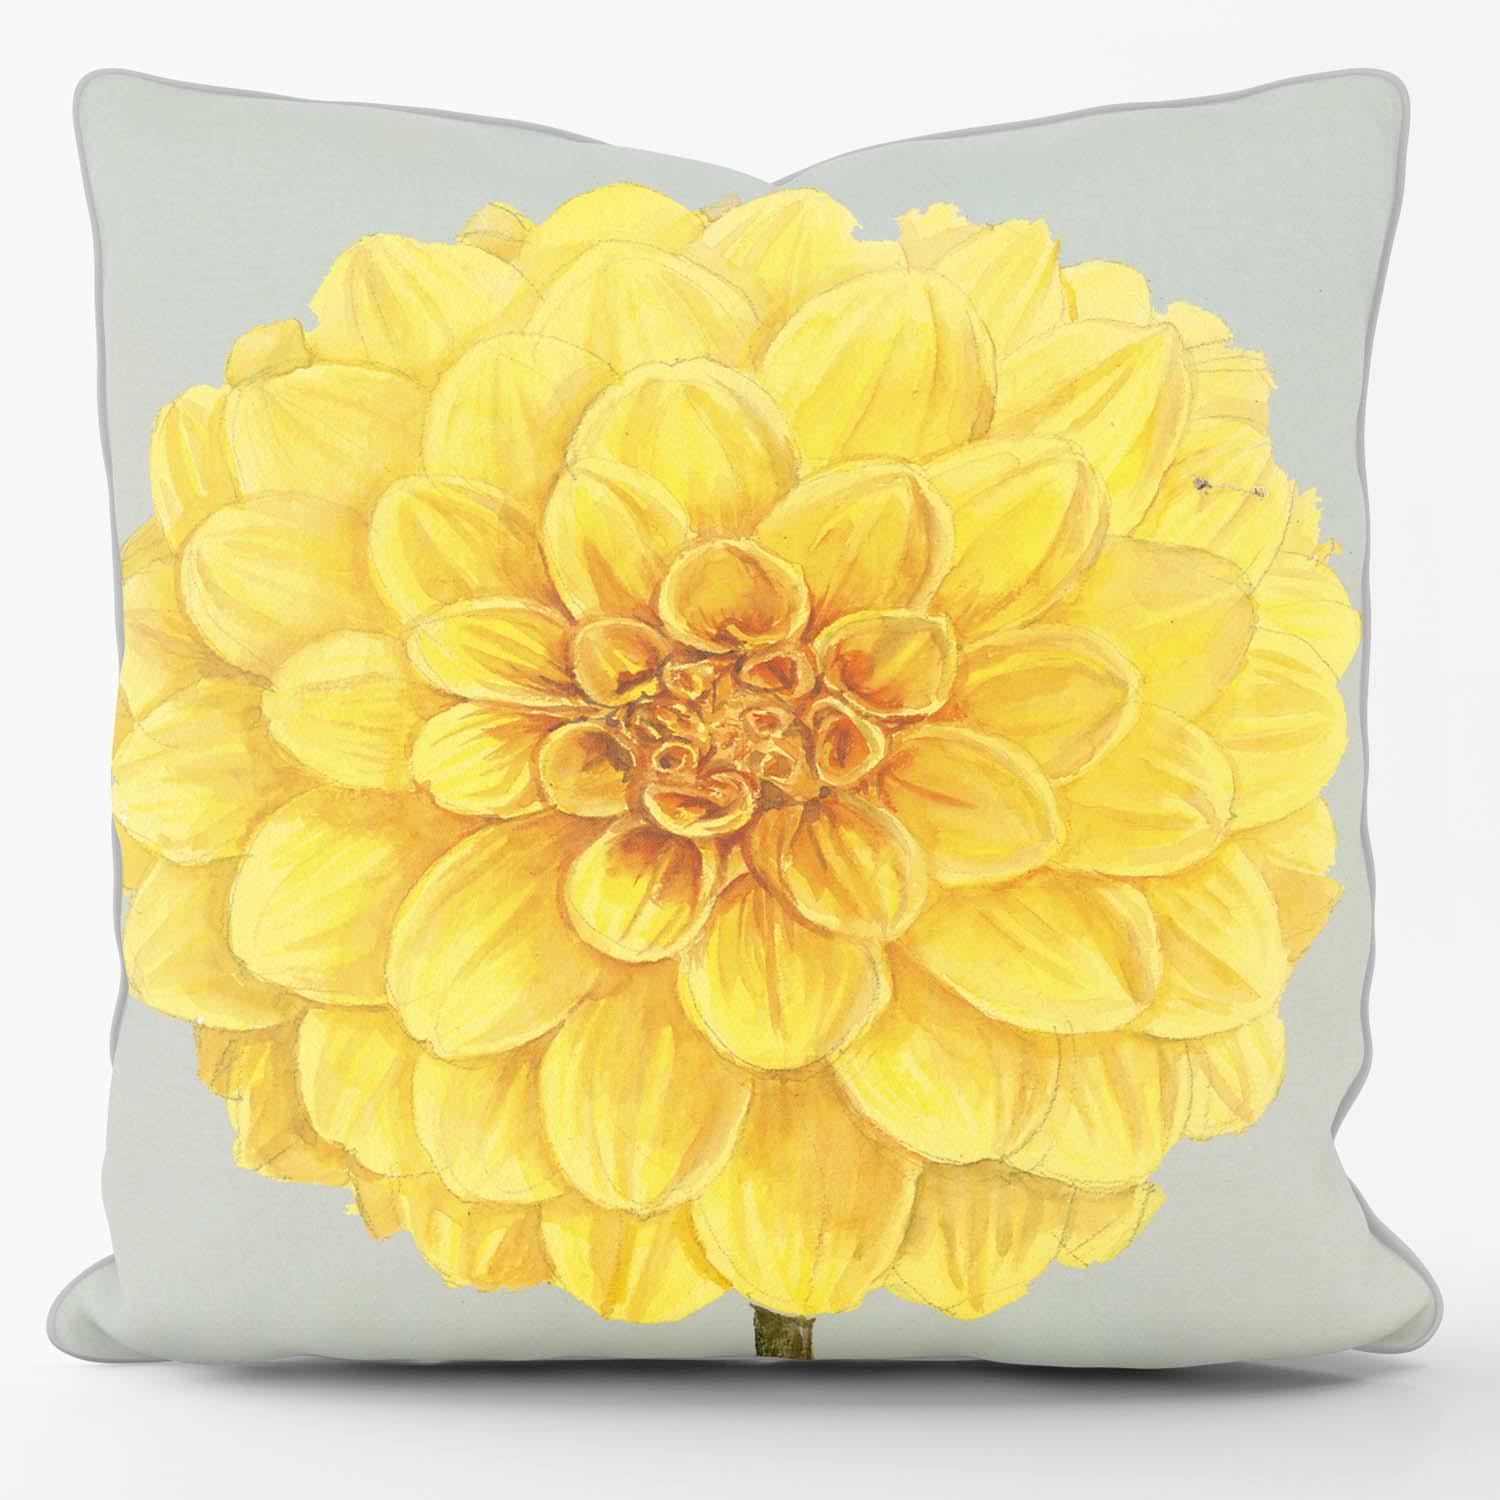 Dahlia Golden Leader - Alfred Wise Outdoor Cushion - Handmade Cushions UK - WeLoveCushions